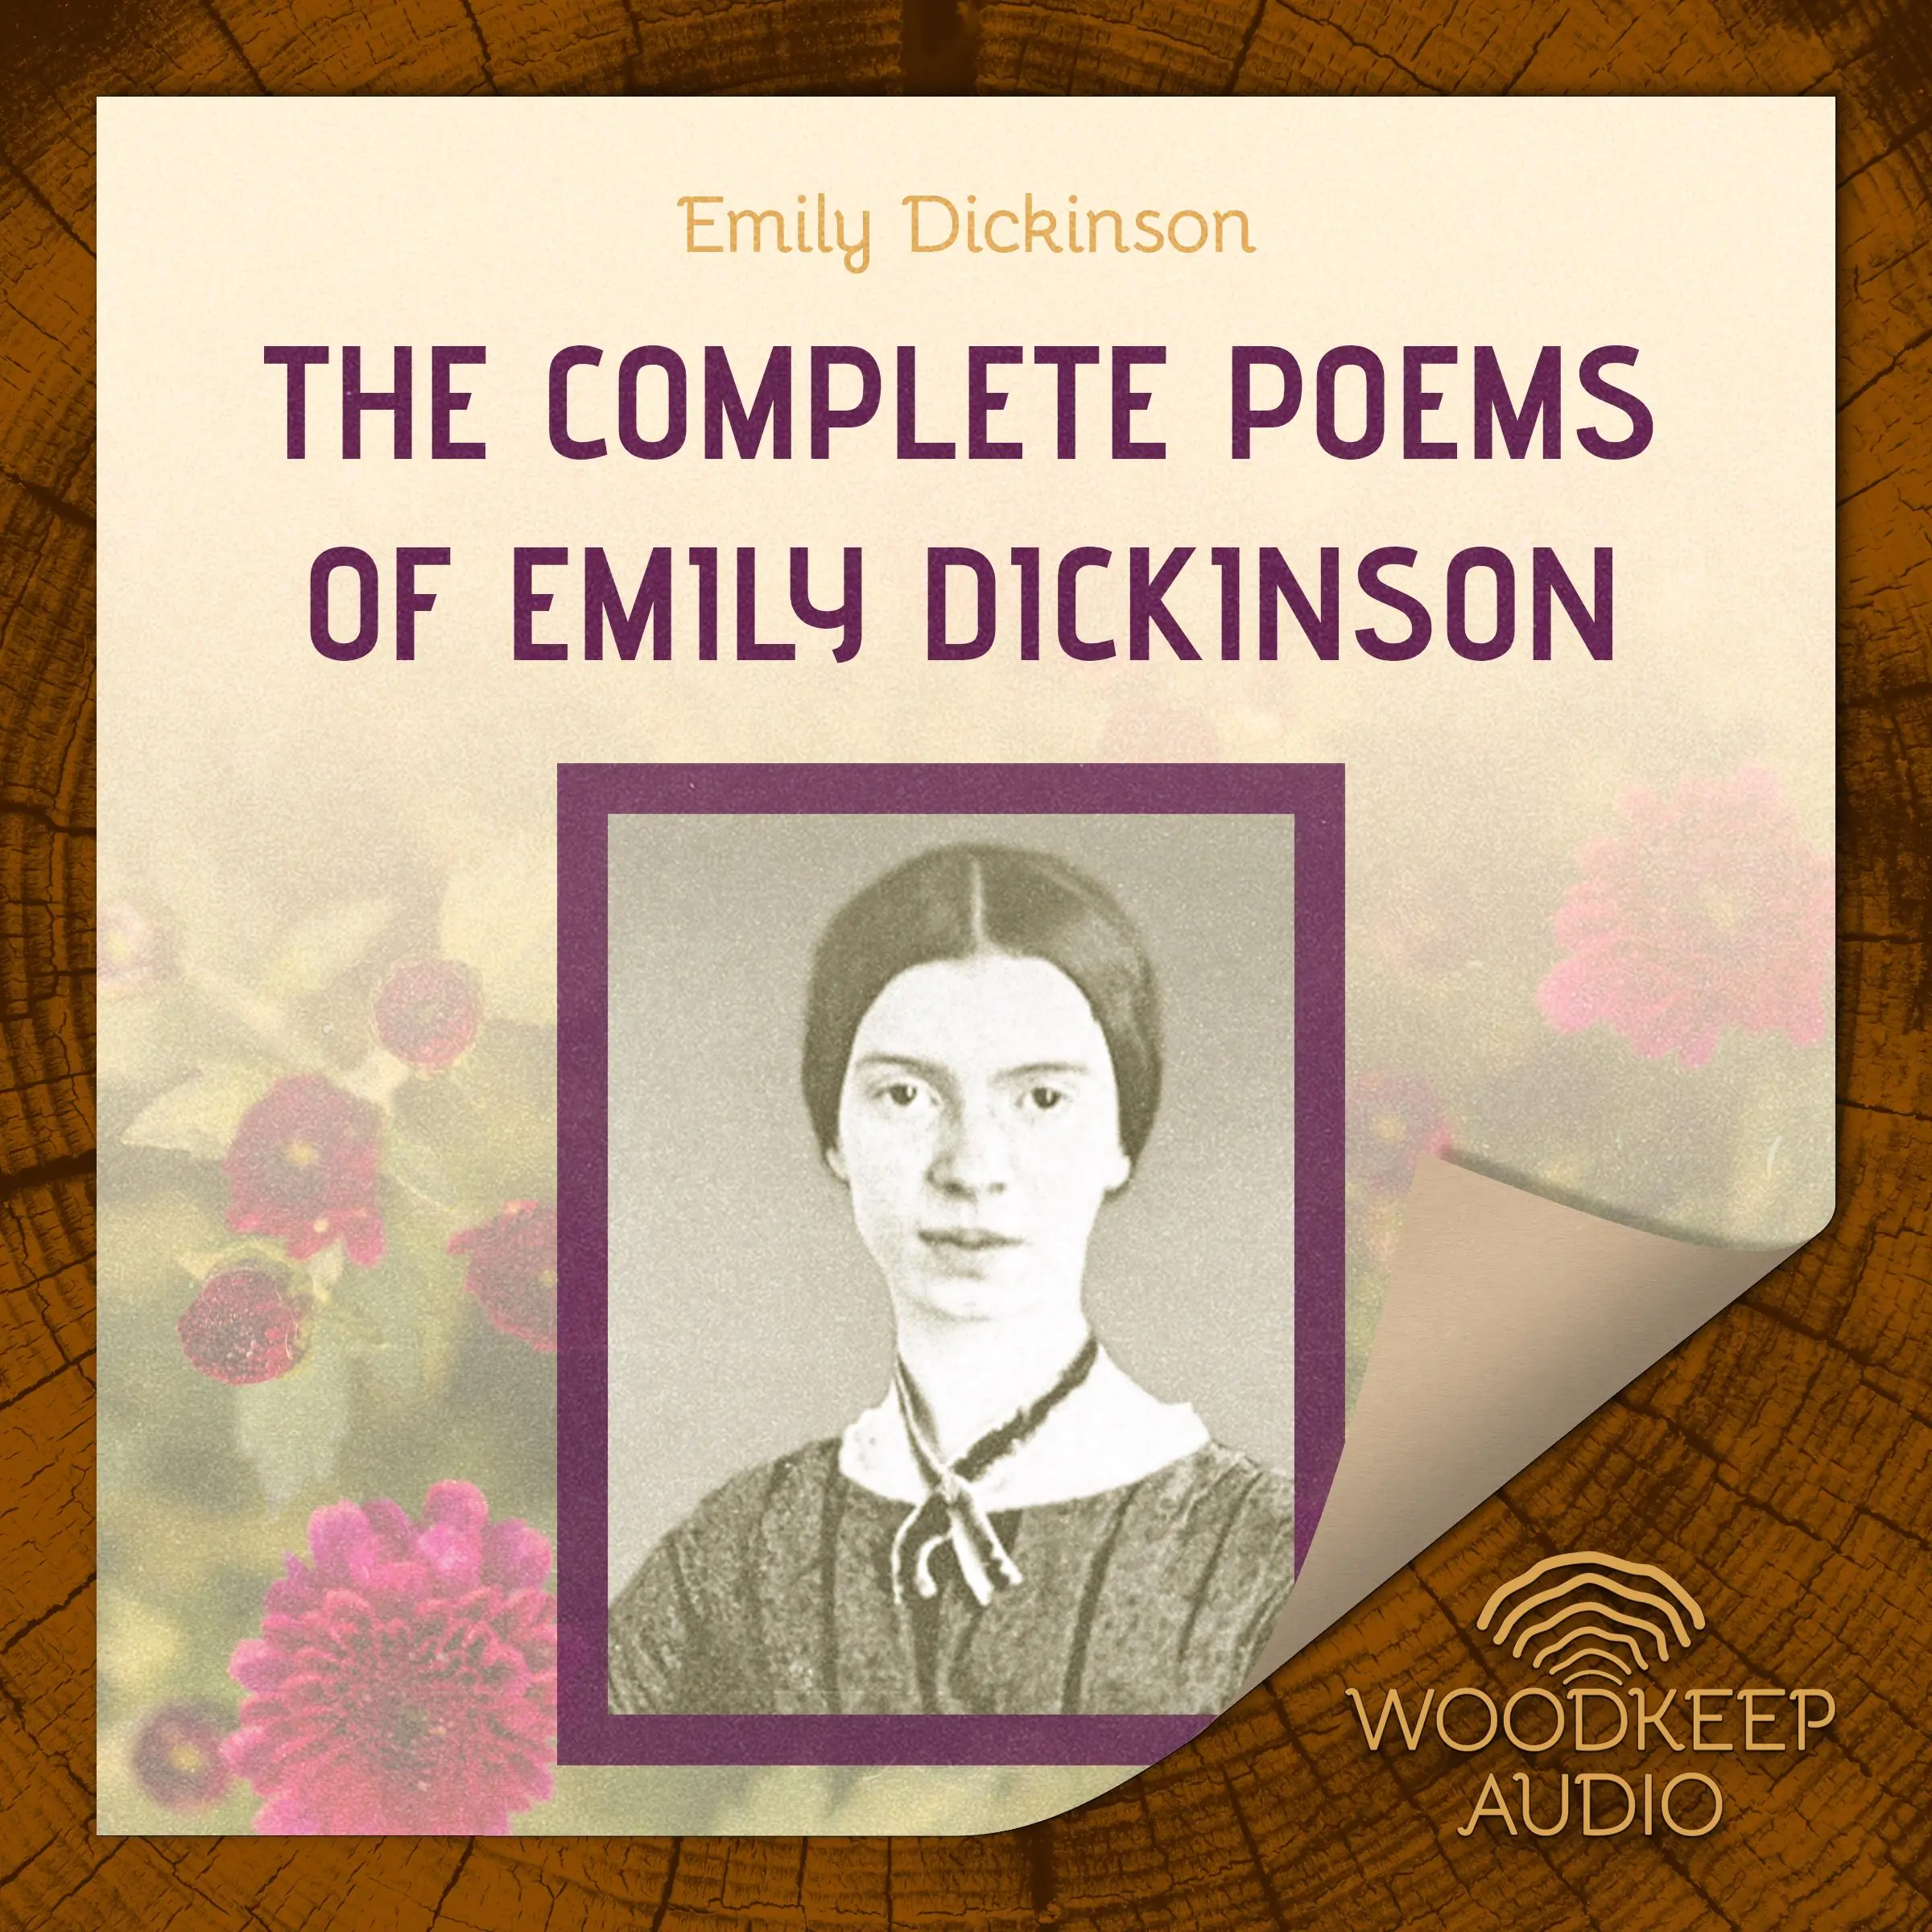 The Complete Poems of Emily Dickinson Audiobook by Emily Dickinson